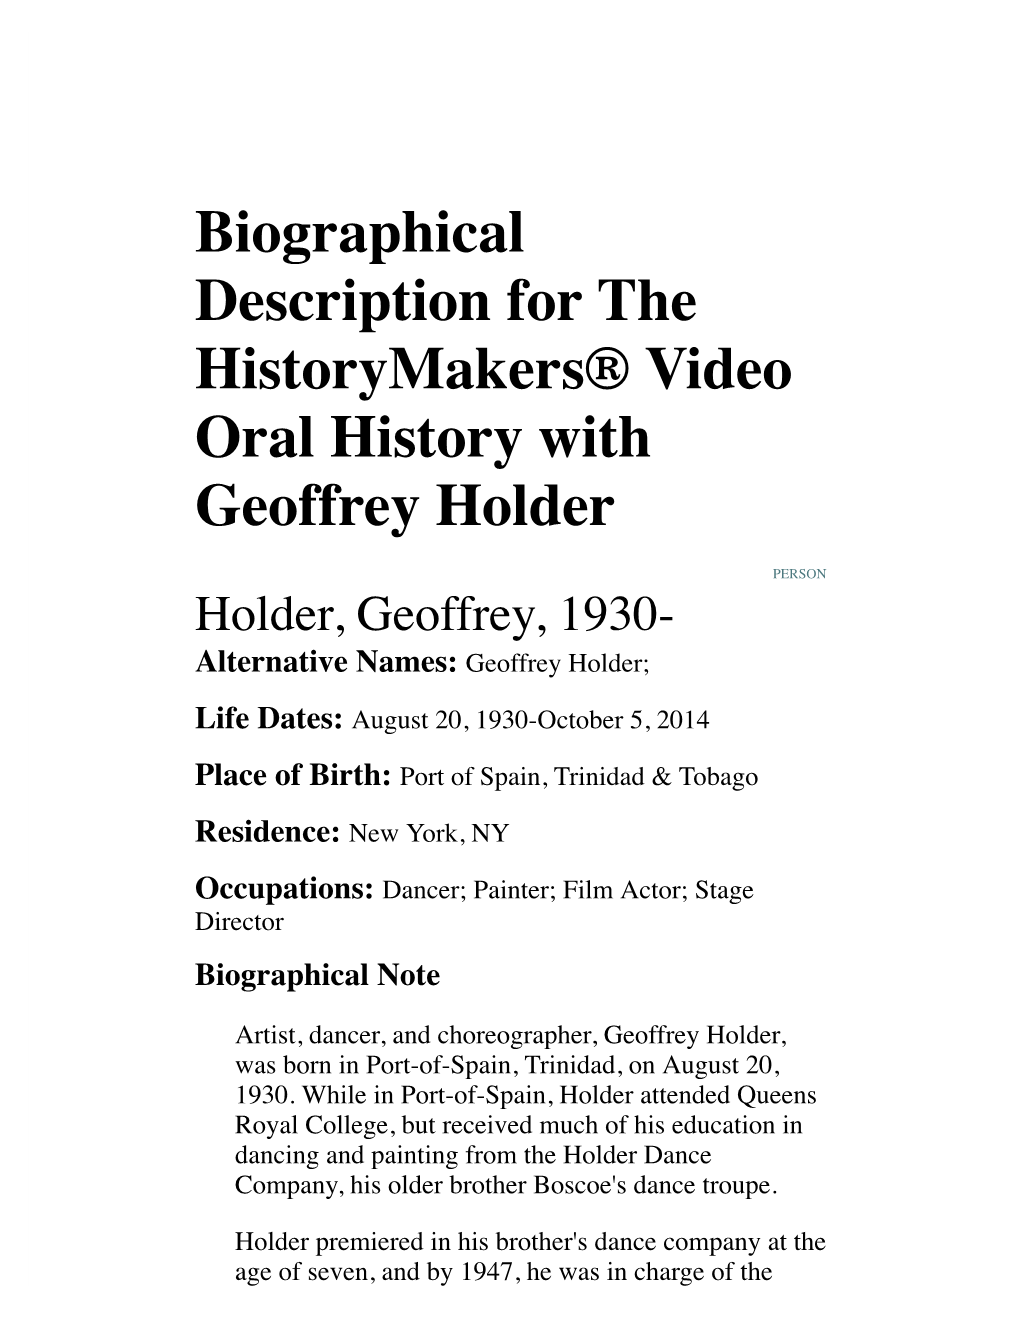 Biographical Description for the Historymakers® Video Oral History with Geoffrey Holder